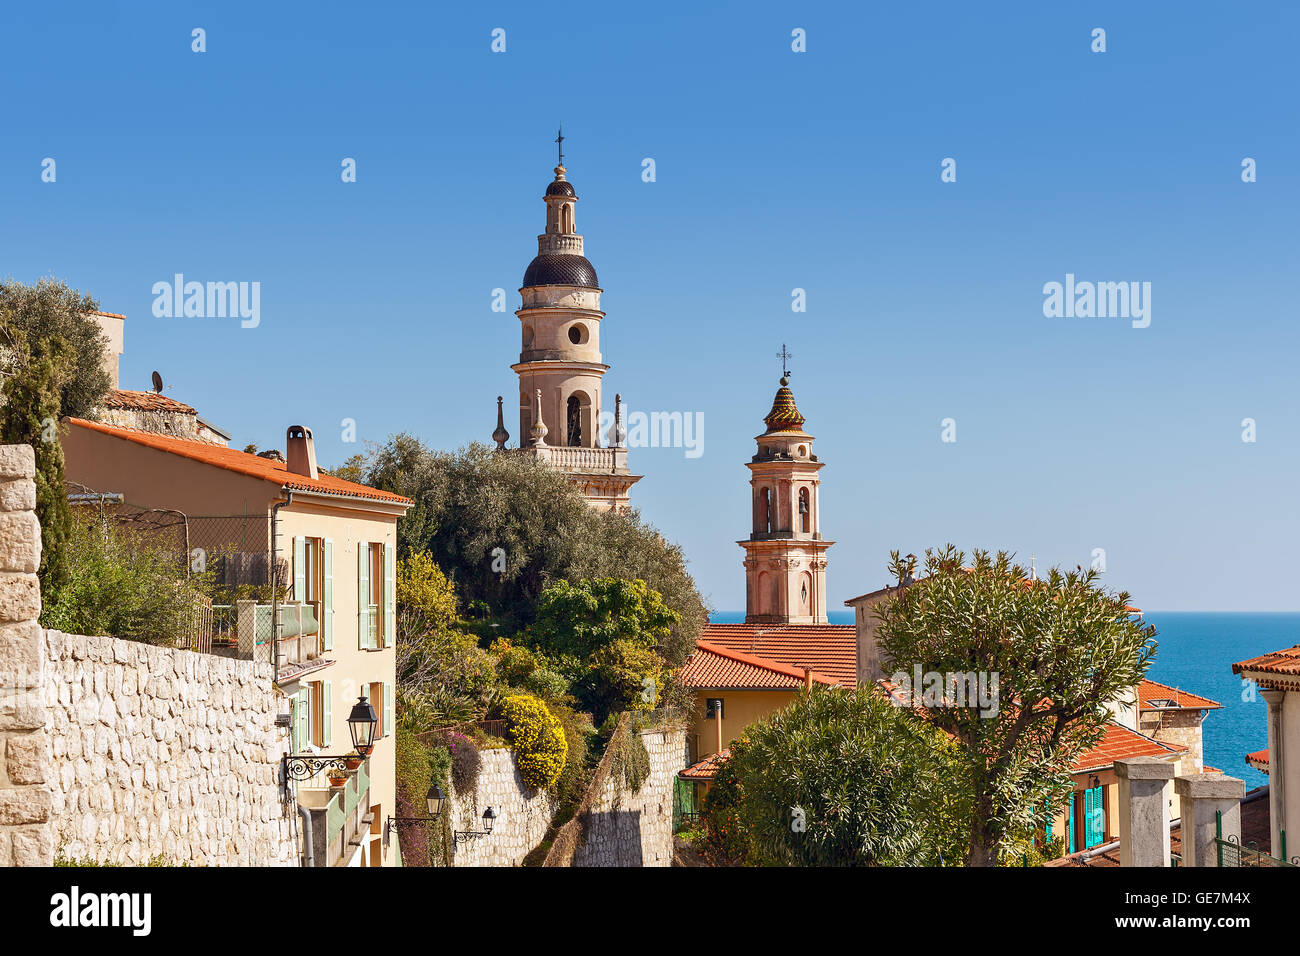 Two campaniles among houses under blue sky as Mediterranean sea on background in Menton, France. Stock Photo